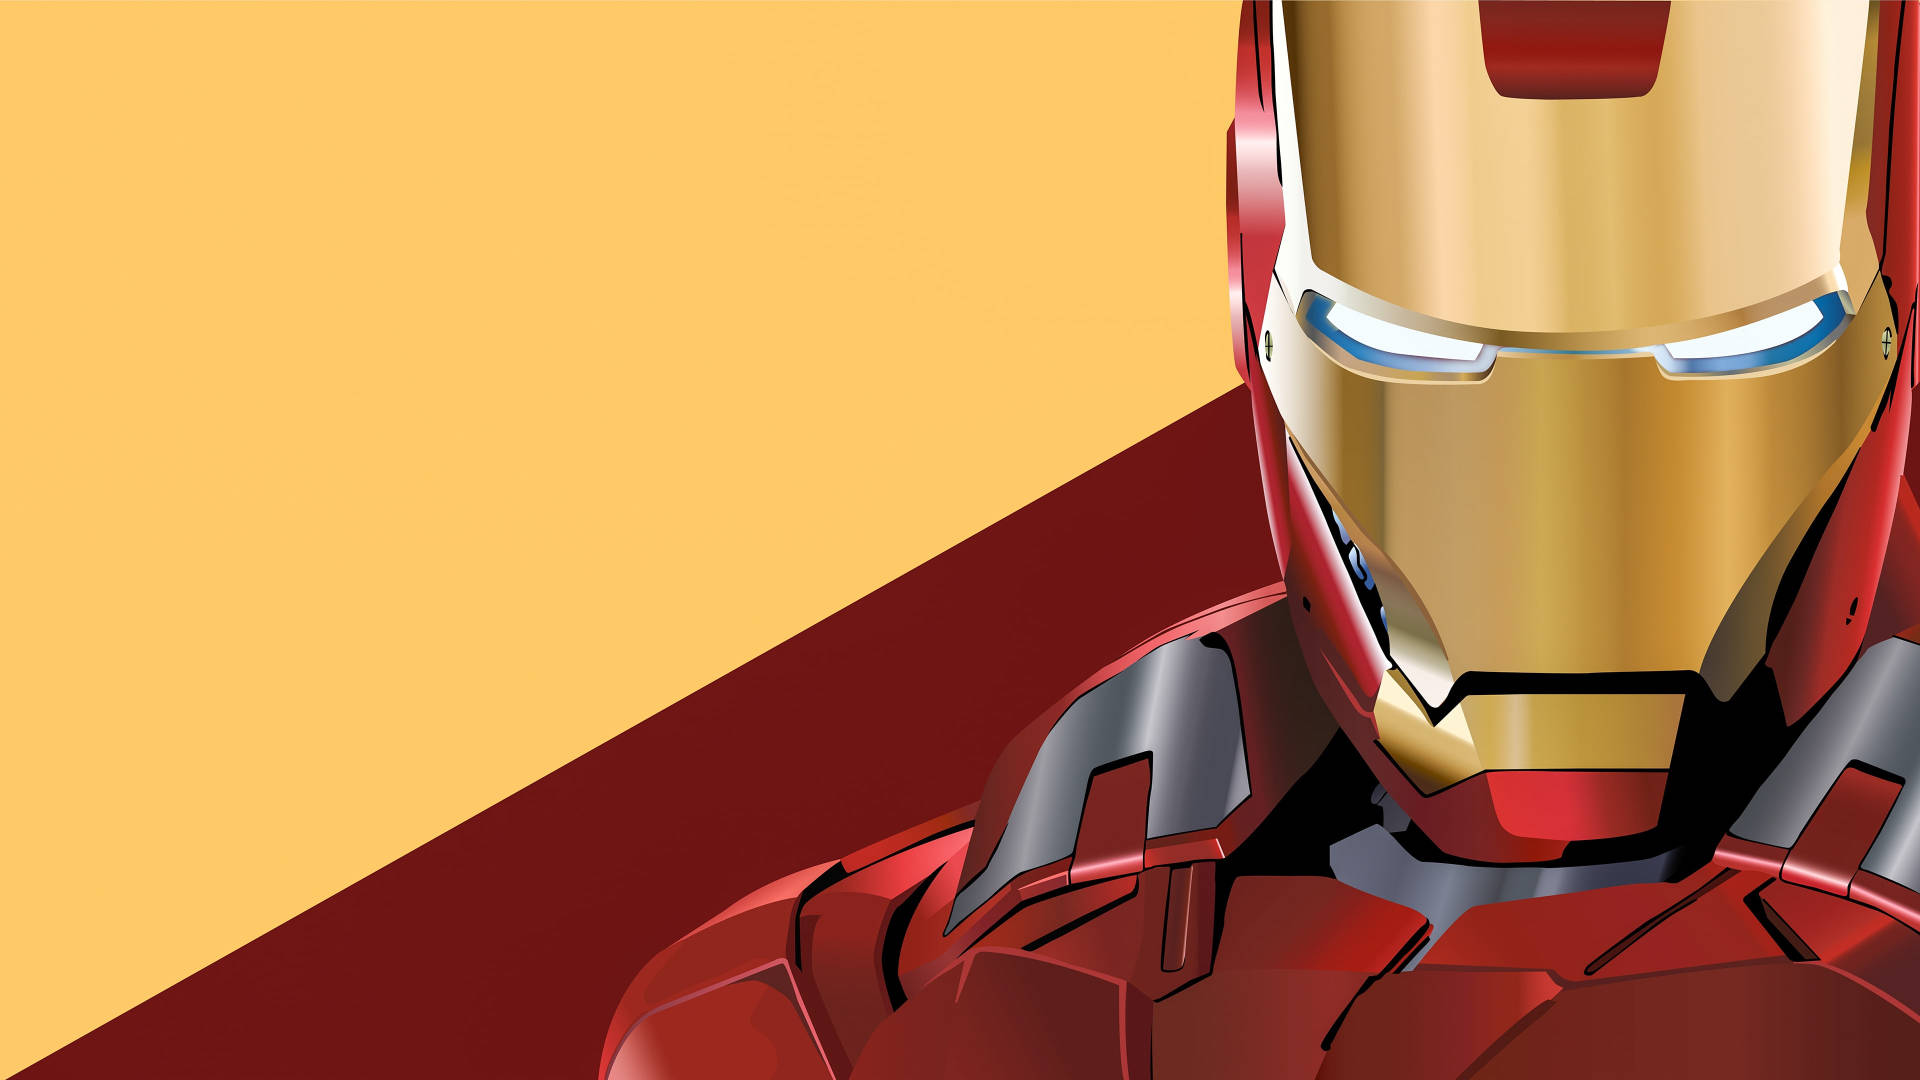 Hd Superhero Iron Man Suit And Armor Background